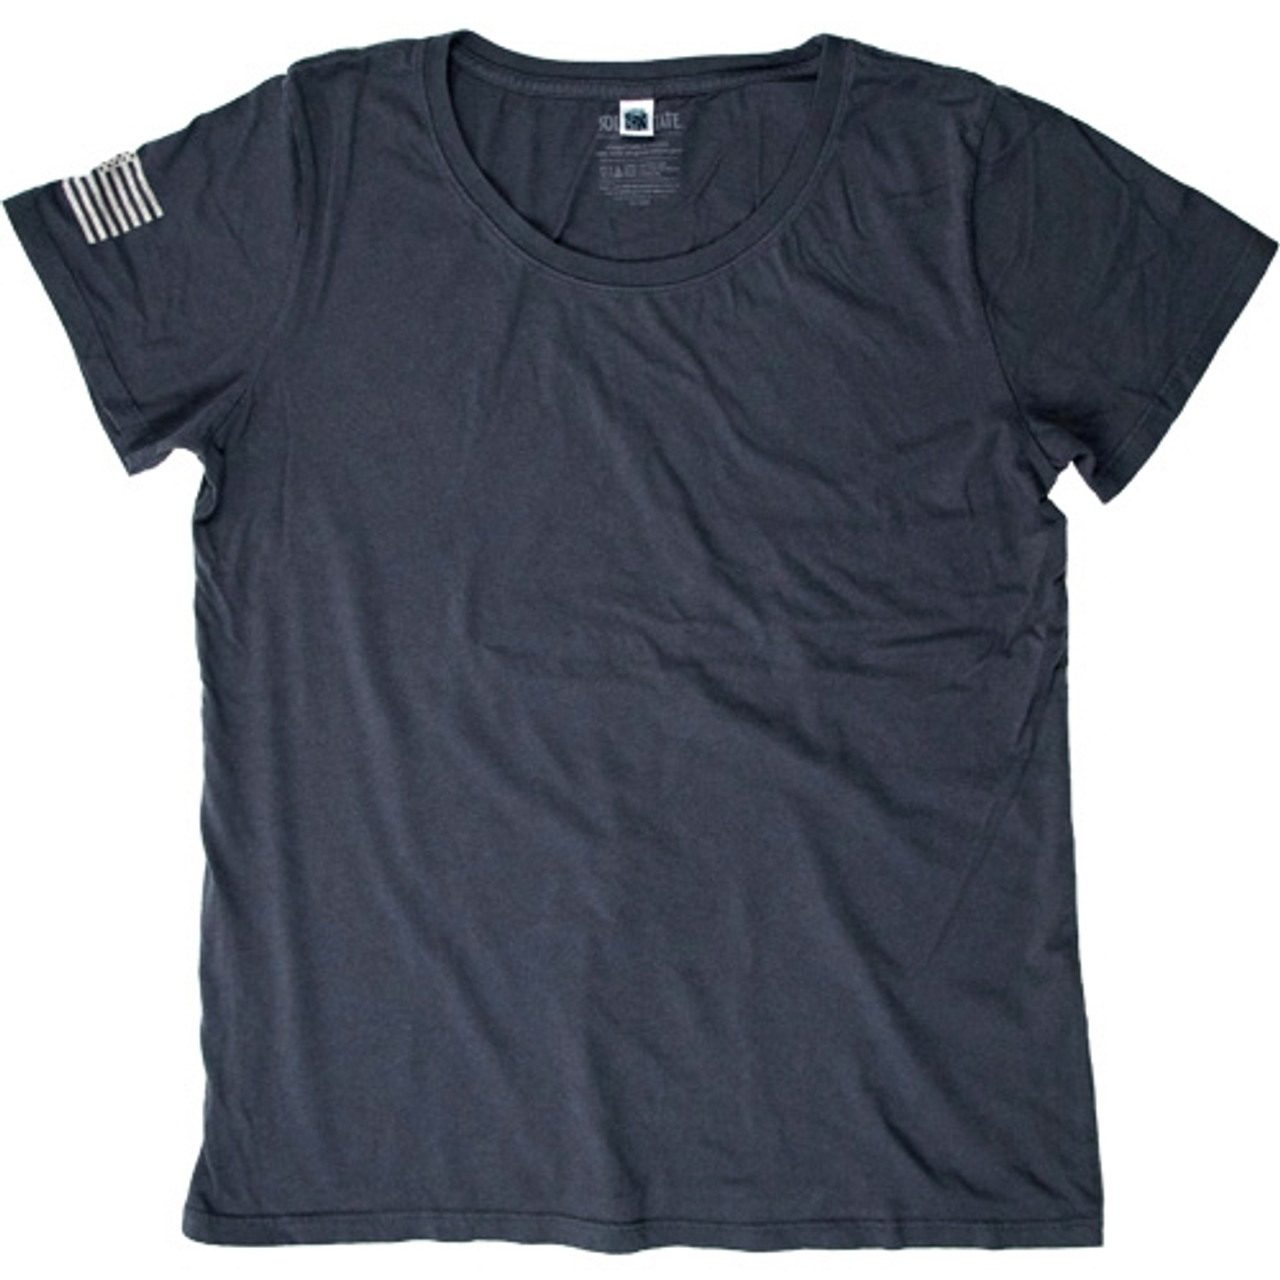 Solid State Men's Great American T-shirt posted by ProdOrigin USA in Men's Apparel